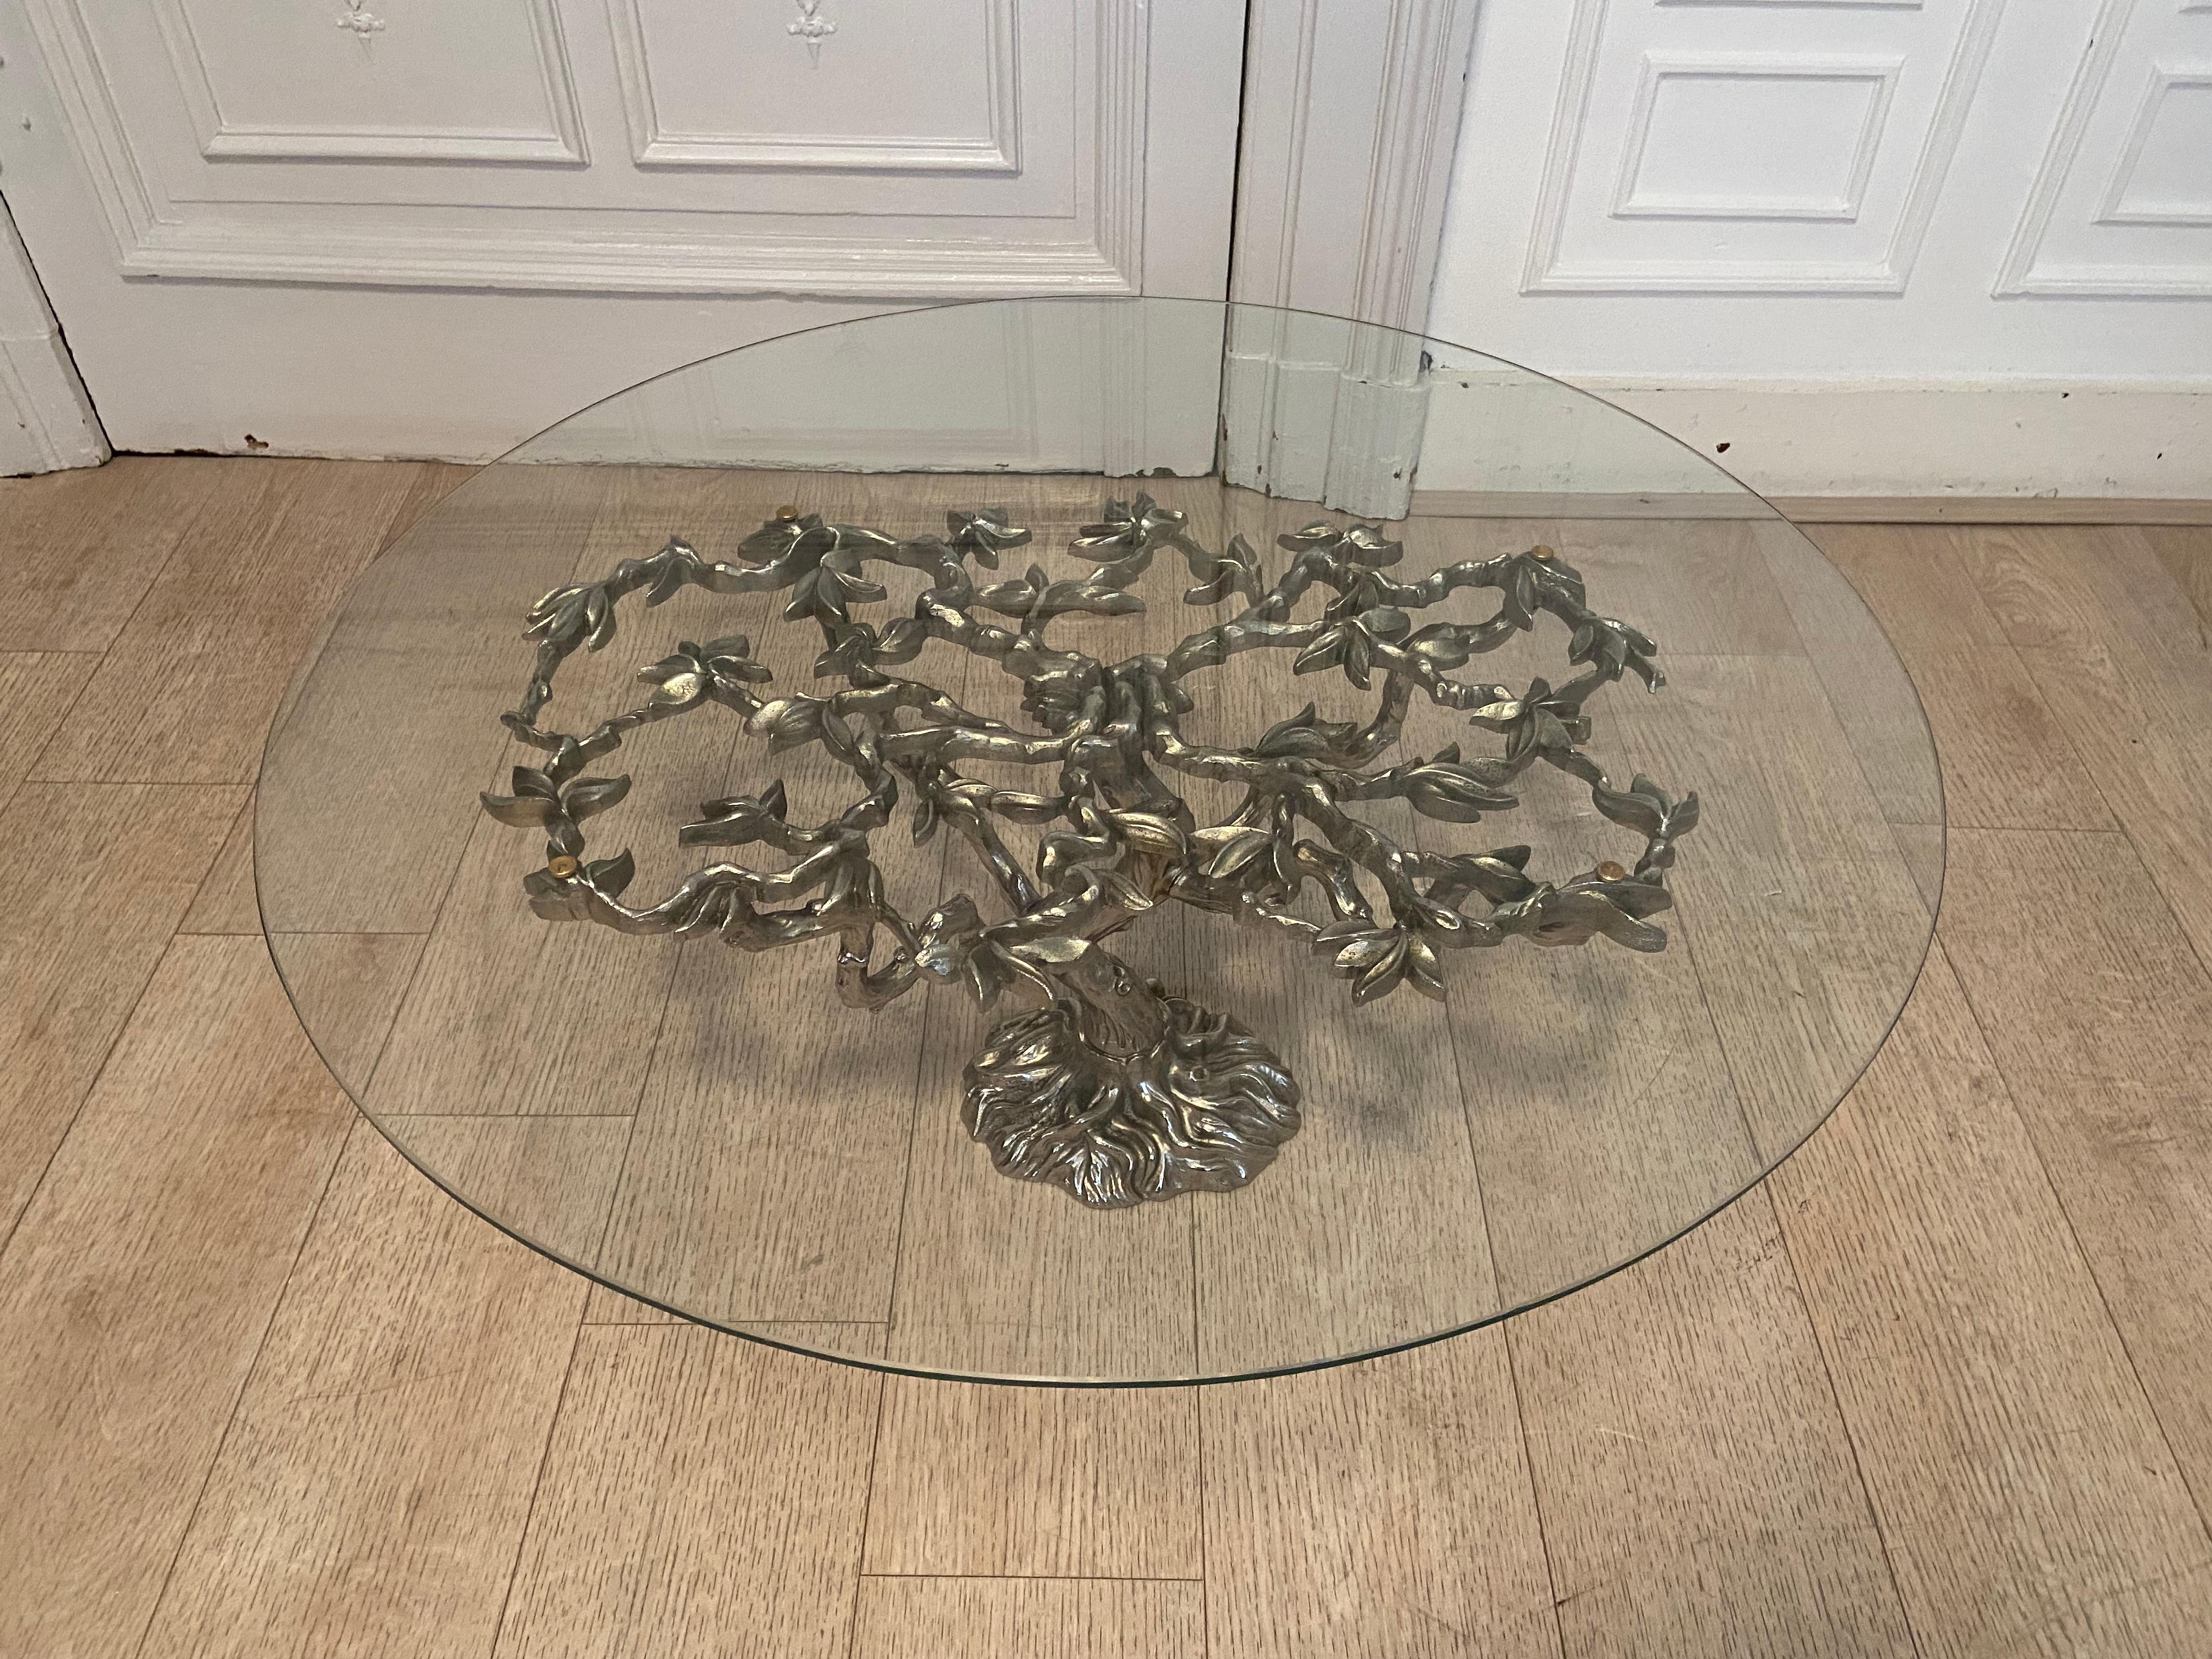 Metal Mid Century Coffee Table in Silver Color from the 1970s Design with Vegetable